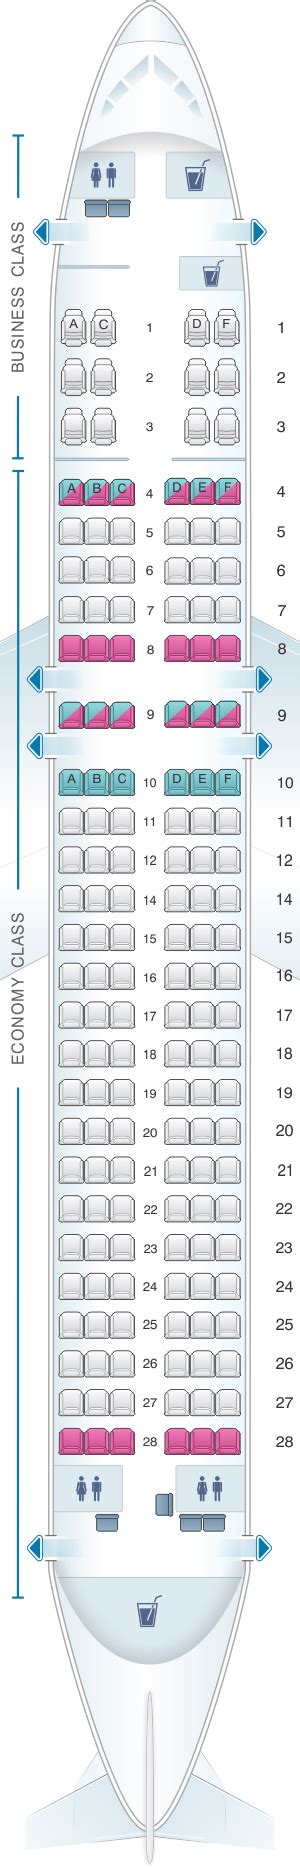 Philippine Airlines A Seating Chart Elcho Table Vrogue Co